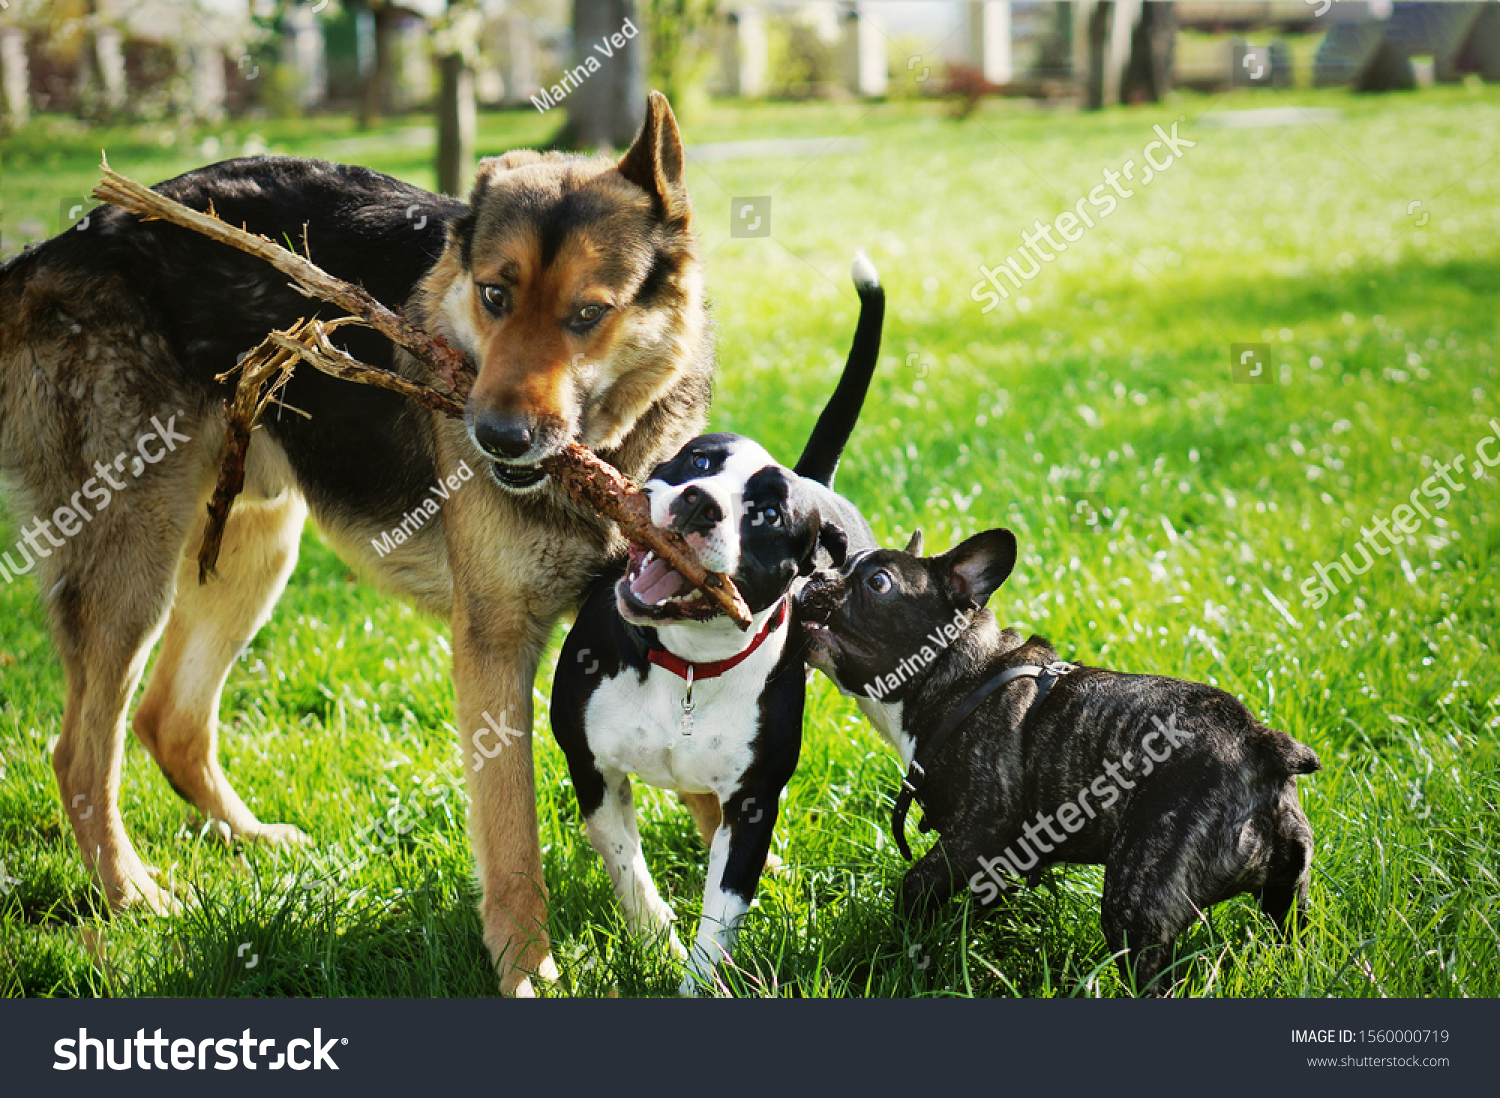 Three friendly happy playing dogs in summer park. German shepherd, american staffordshire terrier and french bulldog holding one stick. Different dog breeds have fun together. #1560000719